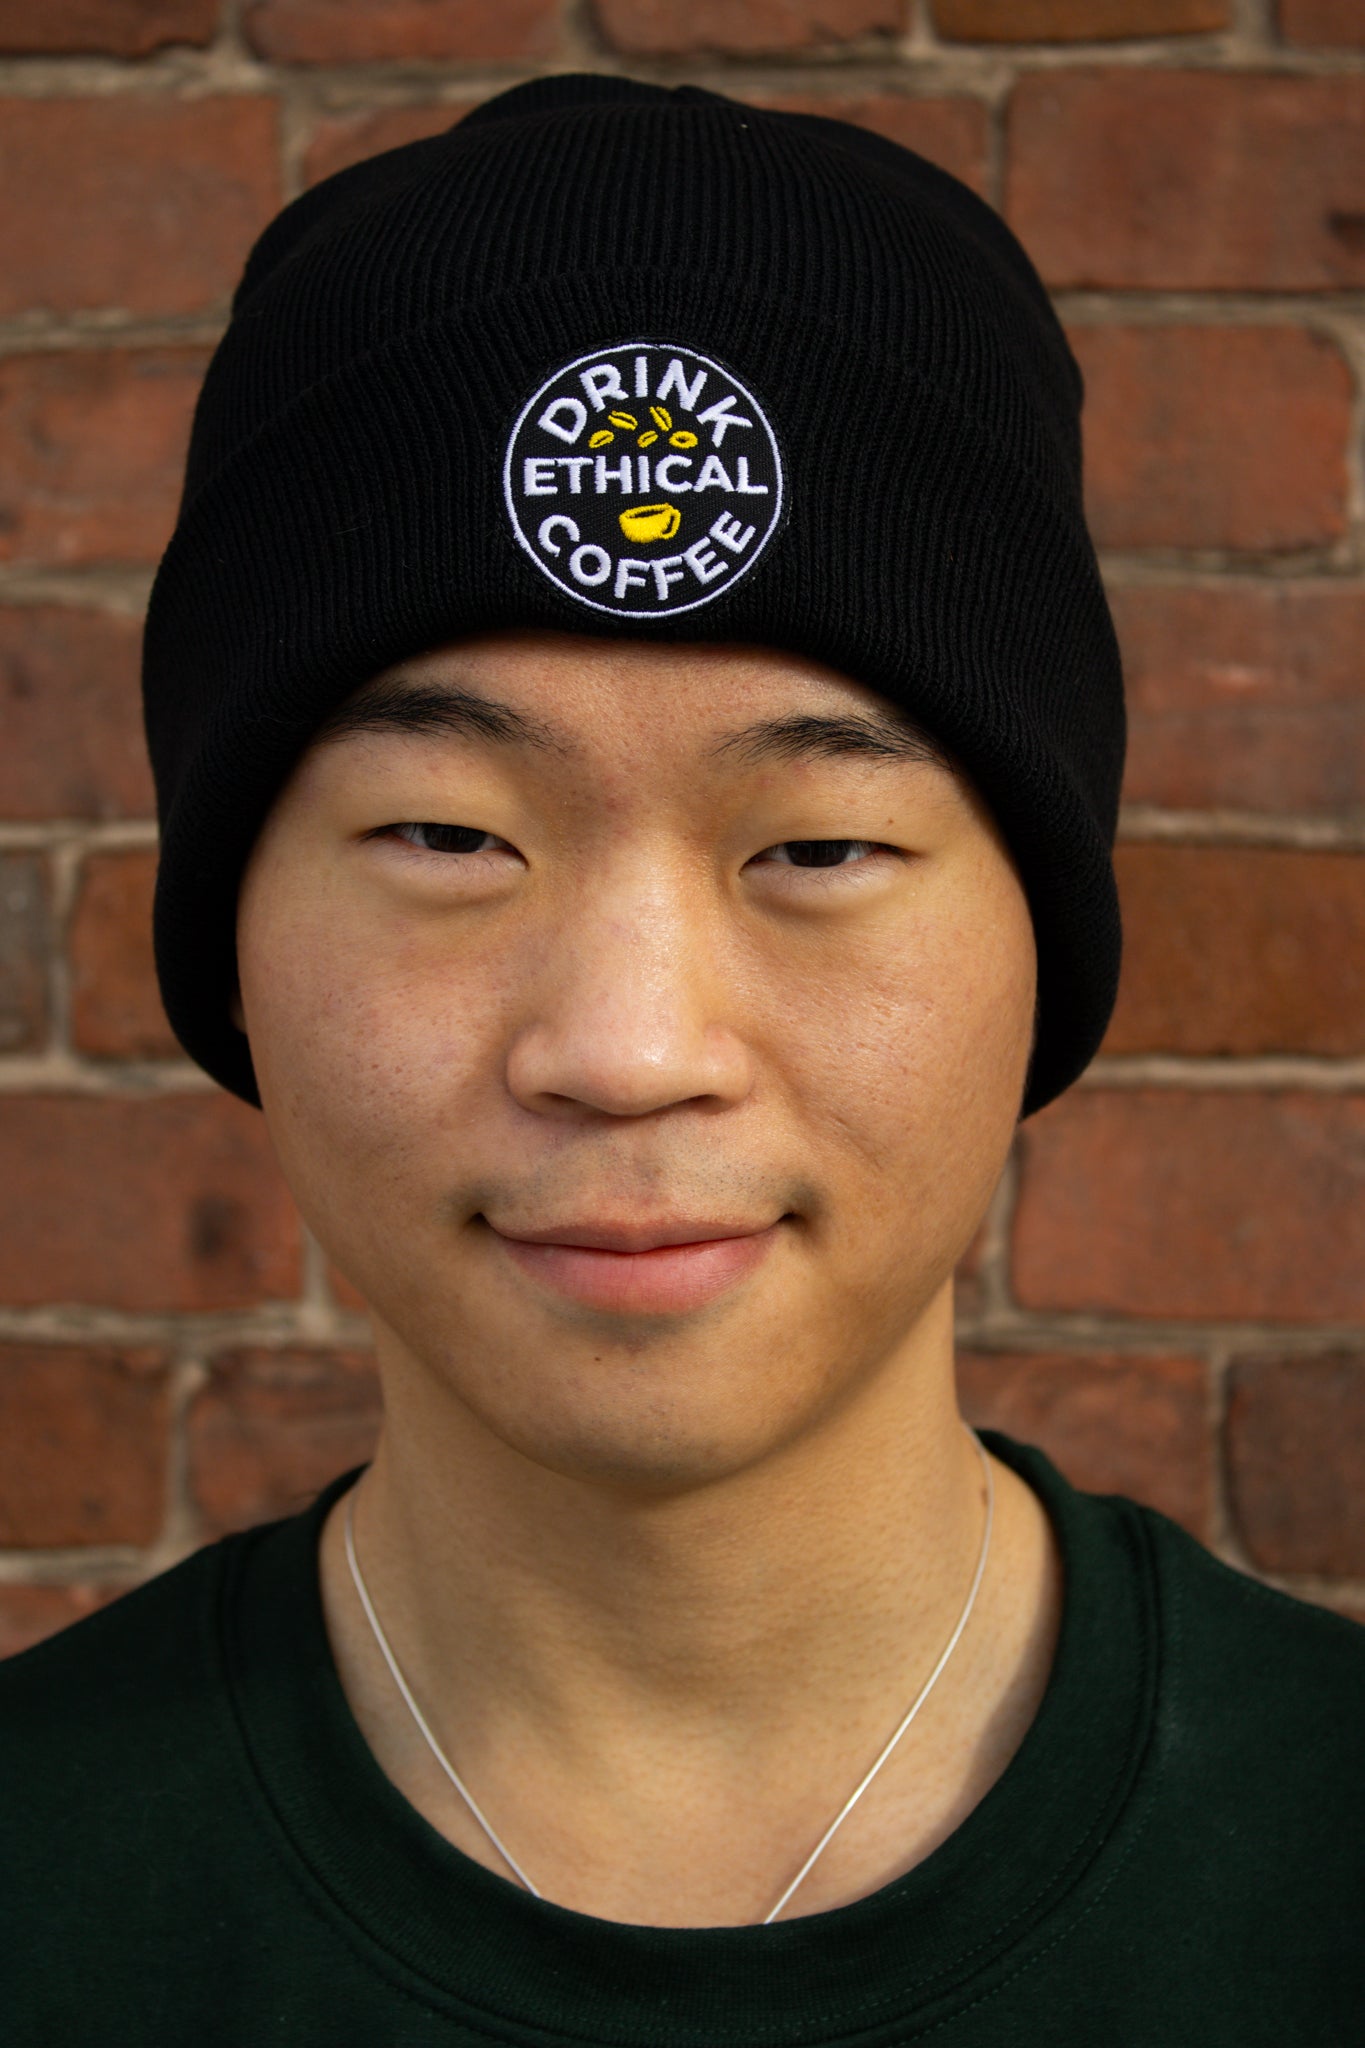 Epoch Toque- "Drink Ethical Coffee"